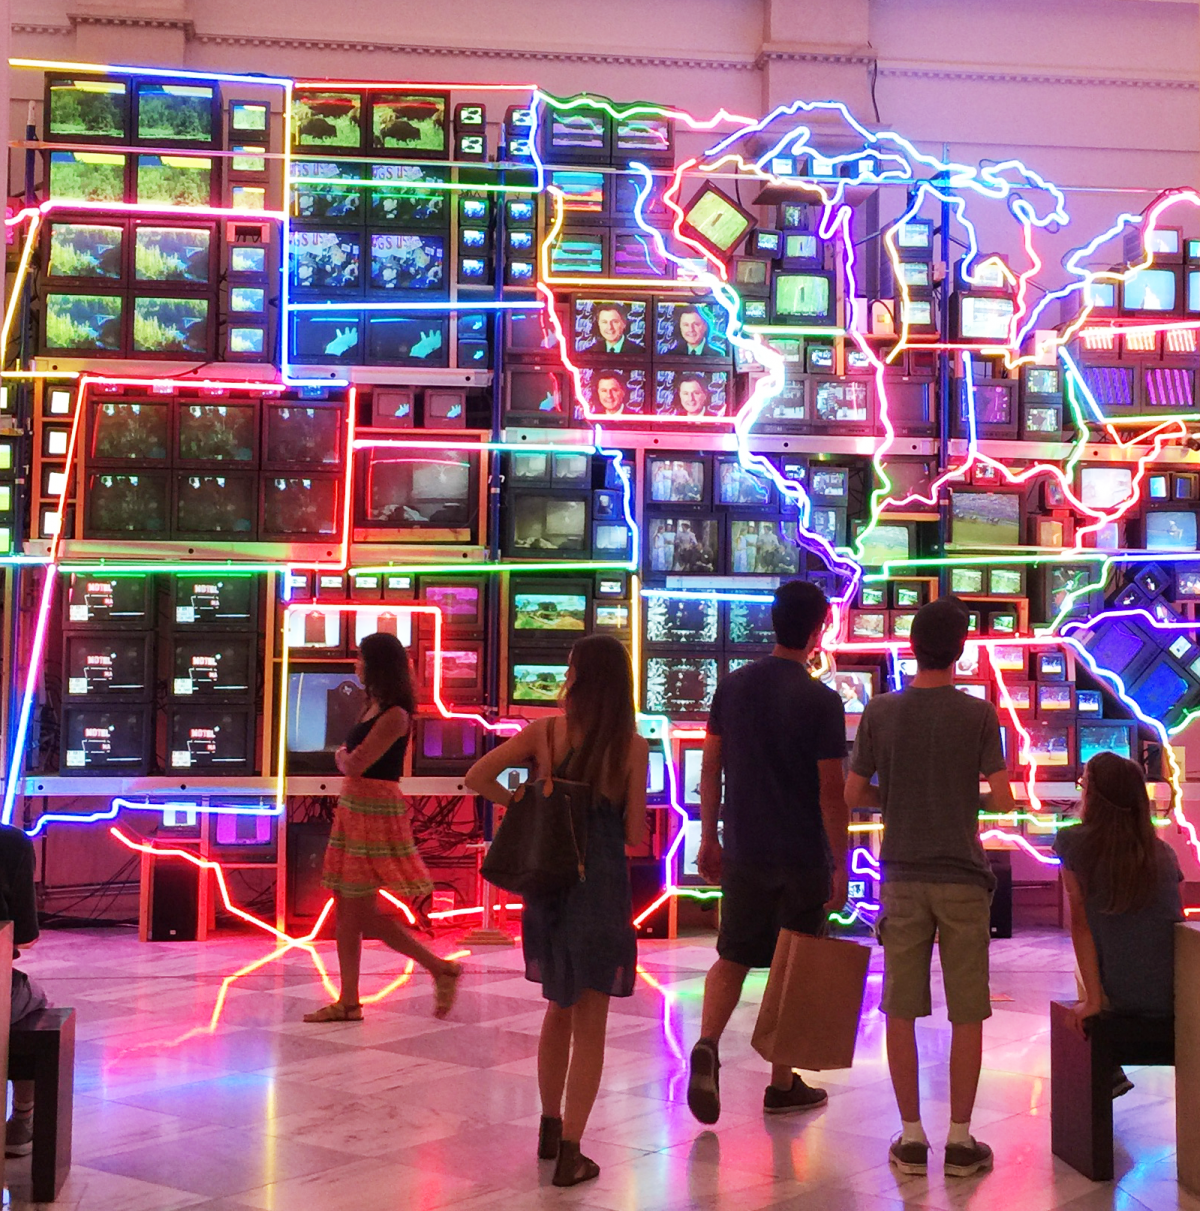 Visitors viewing "Electronic Superhighway" installation, made up of video monitors and neon lights.